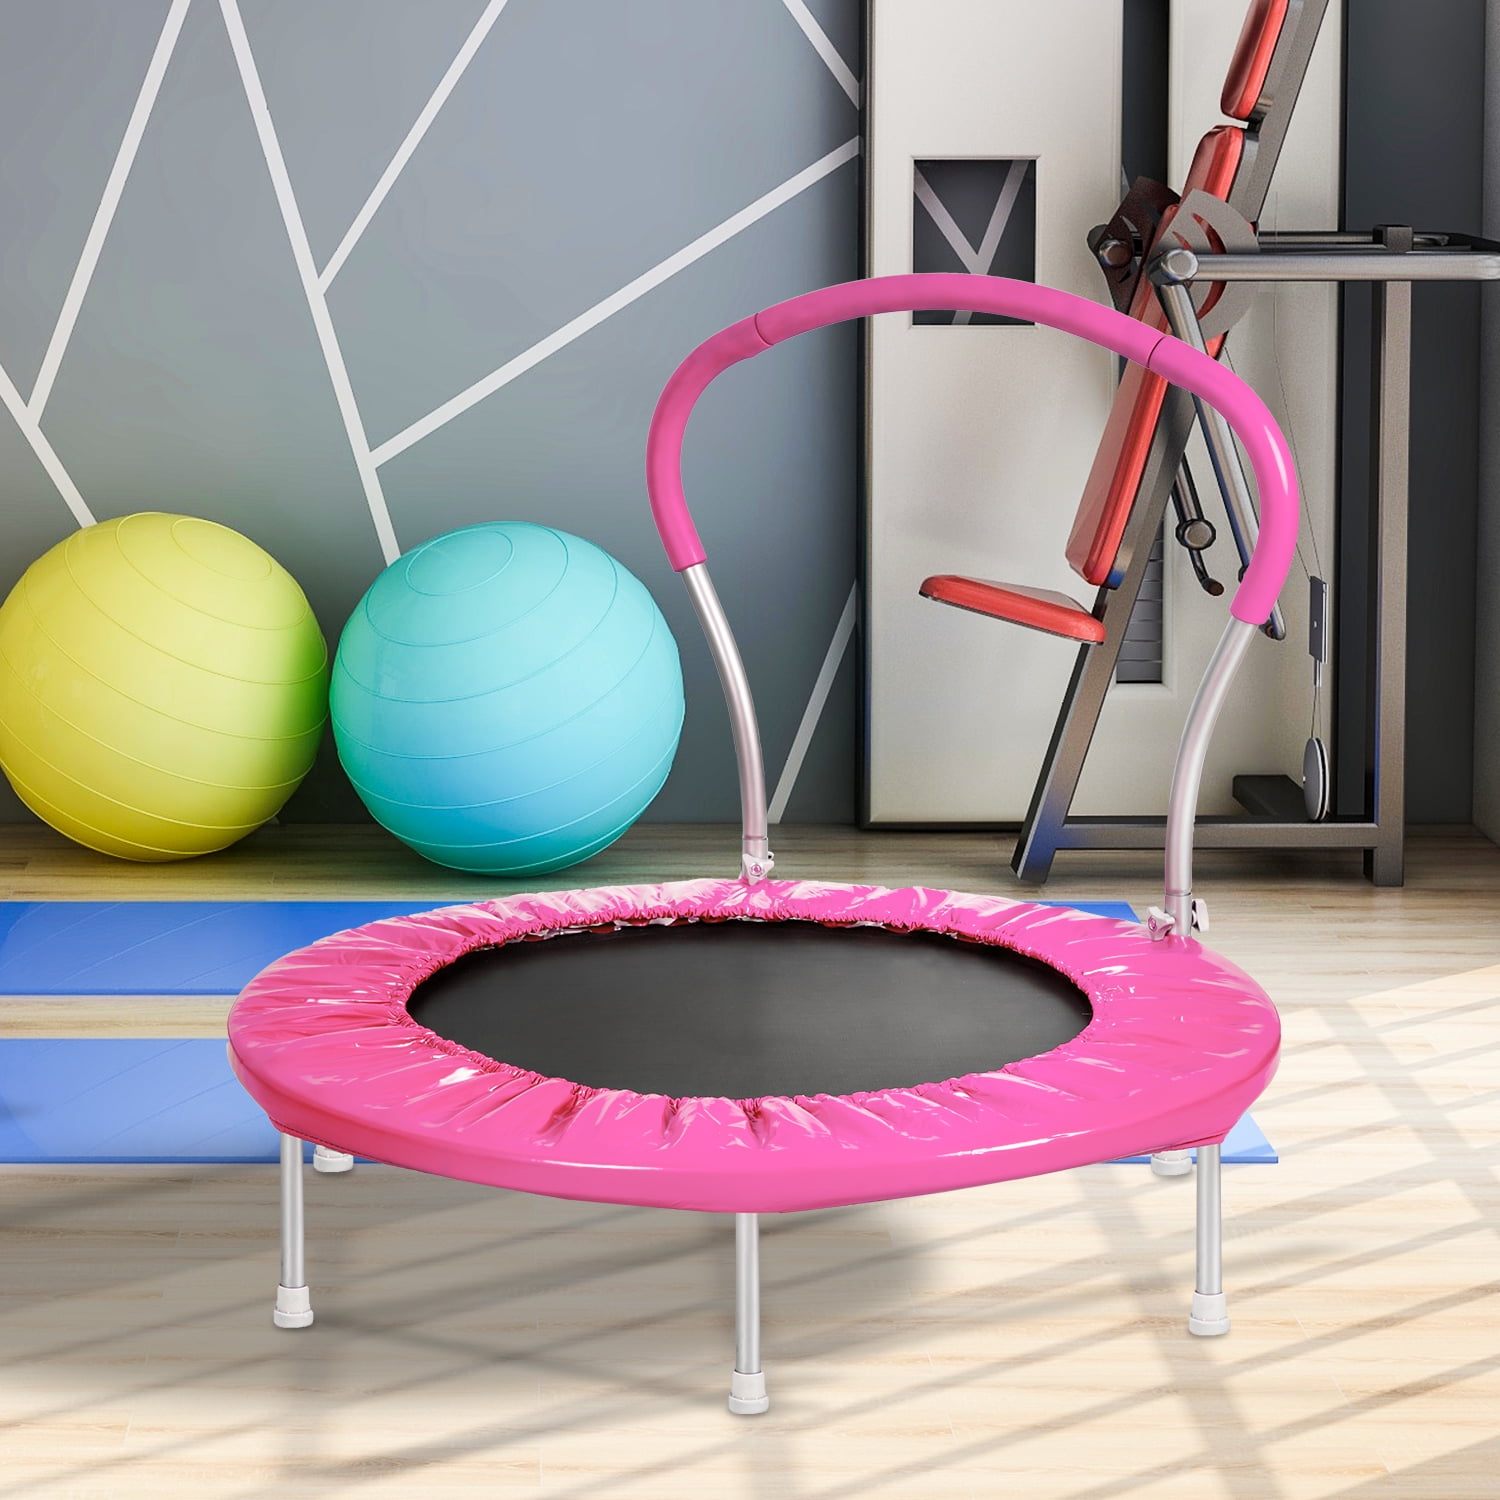 Trampolines For Kids Outdoor Indoor Mini Toddler Trampoline With Enclosure,  Safety Handrail, Birthday Gifts For Kid - Trampolines - AliExpress